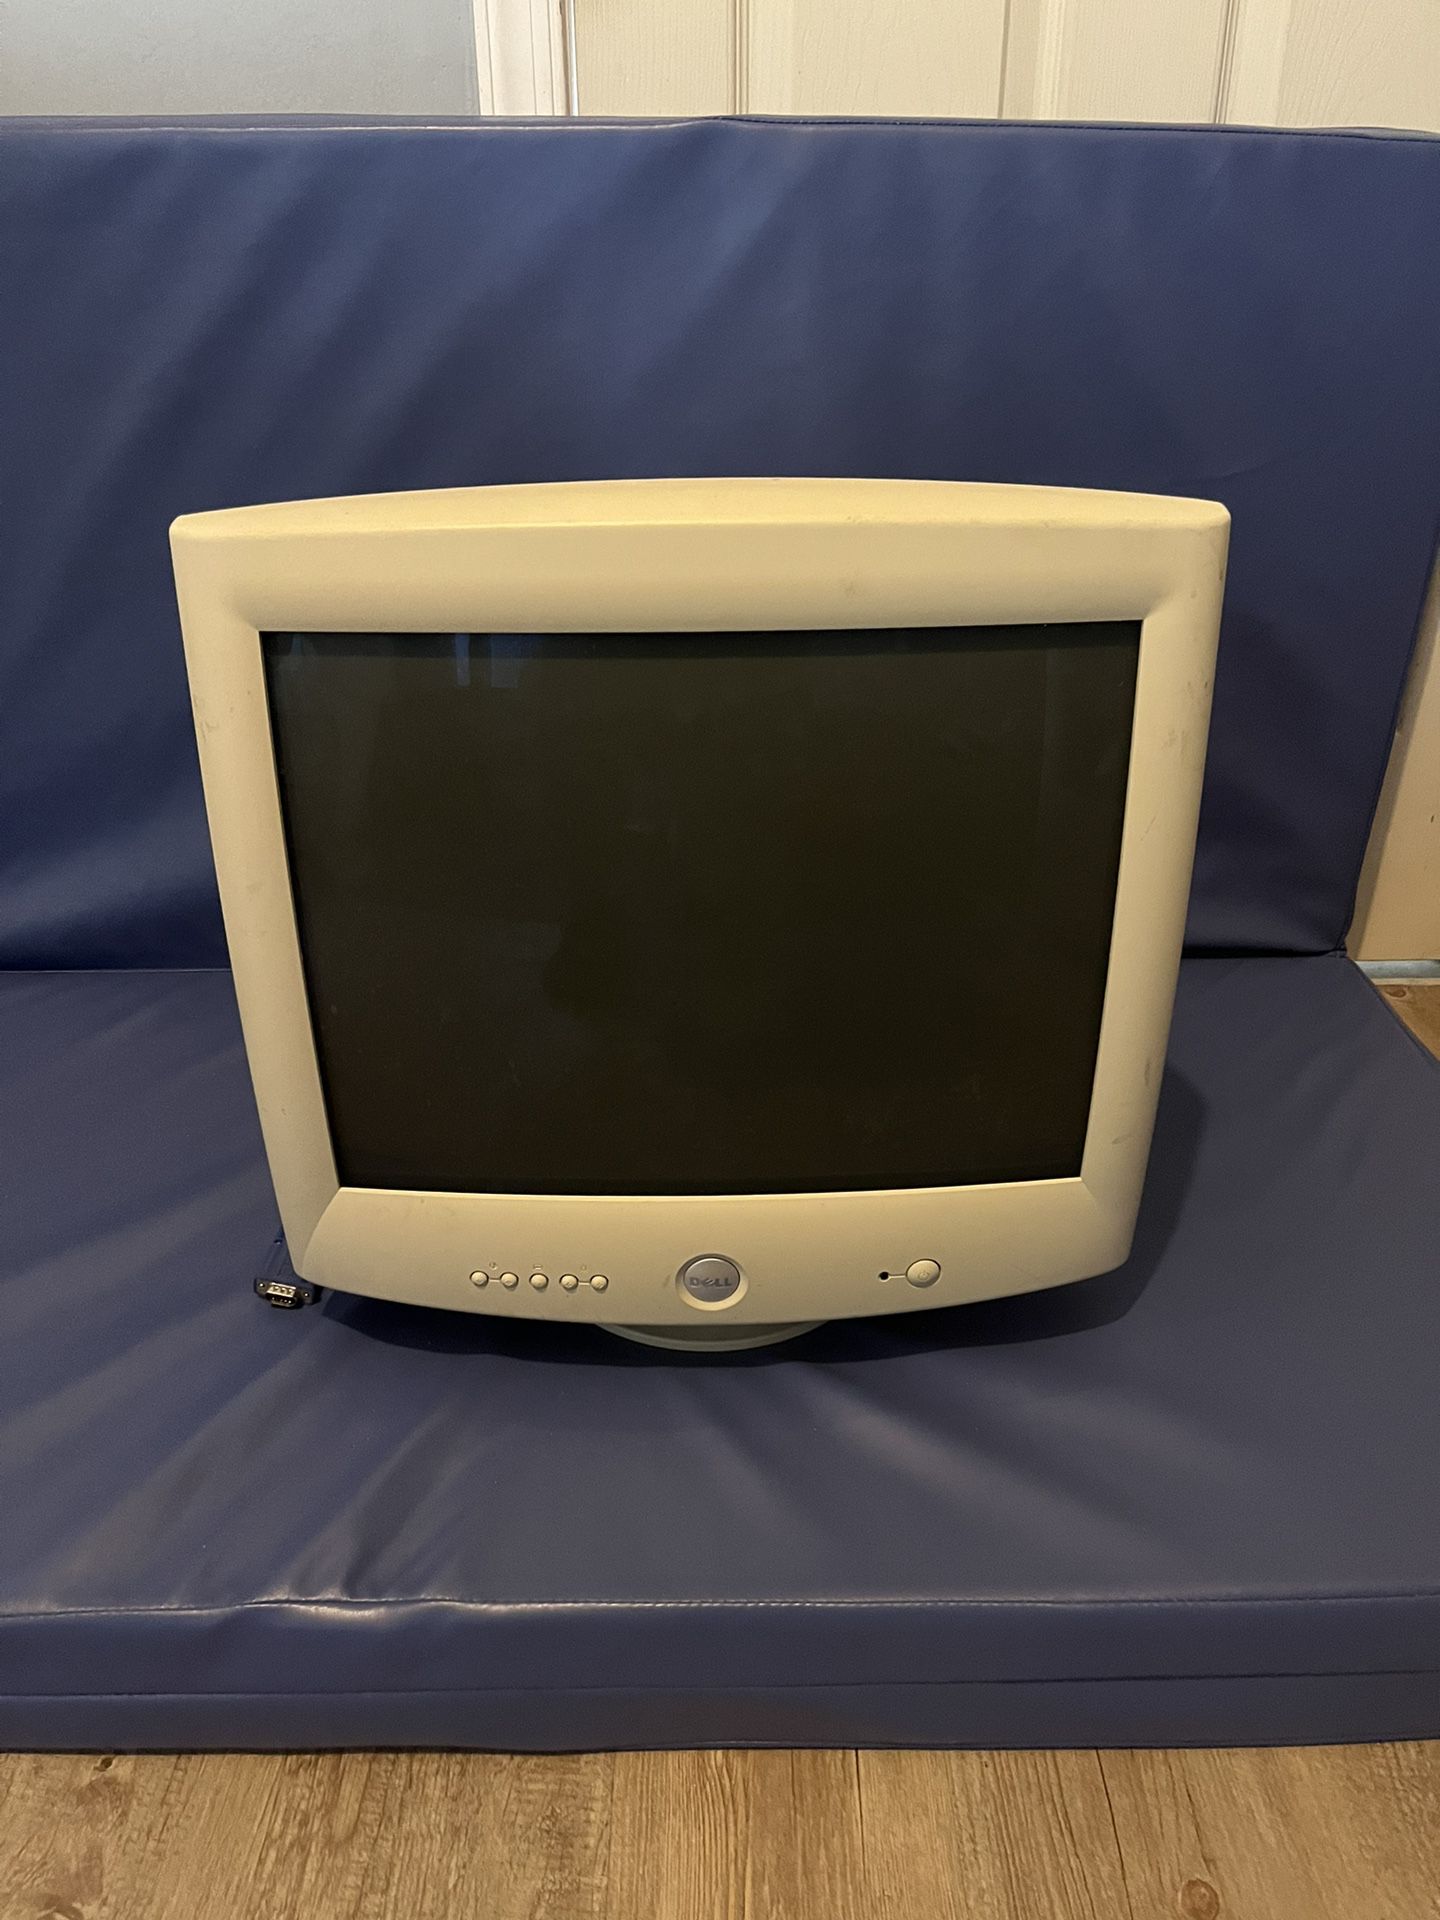 Dell M991 CRT Monitor, Chassis #CM2519, Vintage, Perfect For Retro Games